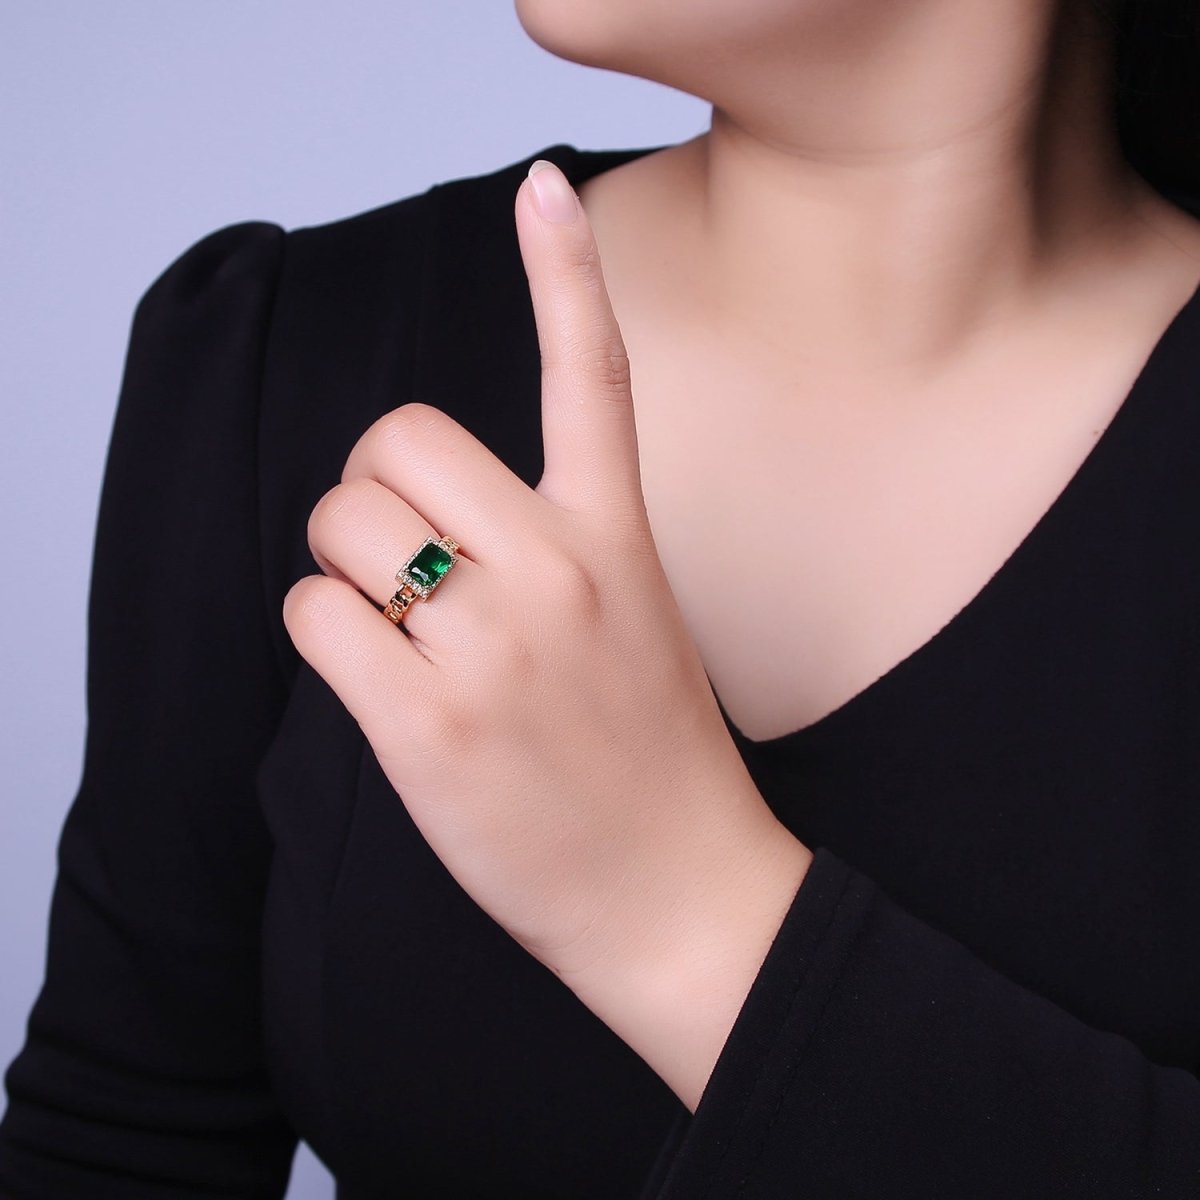 Chunky Emerald Green Cz Stone Ring in 18k Gold Filled Curb Chain Link Band Open Adjustable O-2080 - DLUXCA